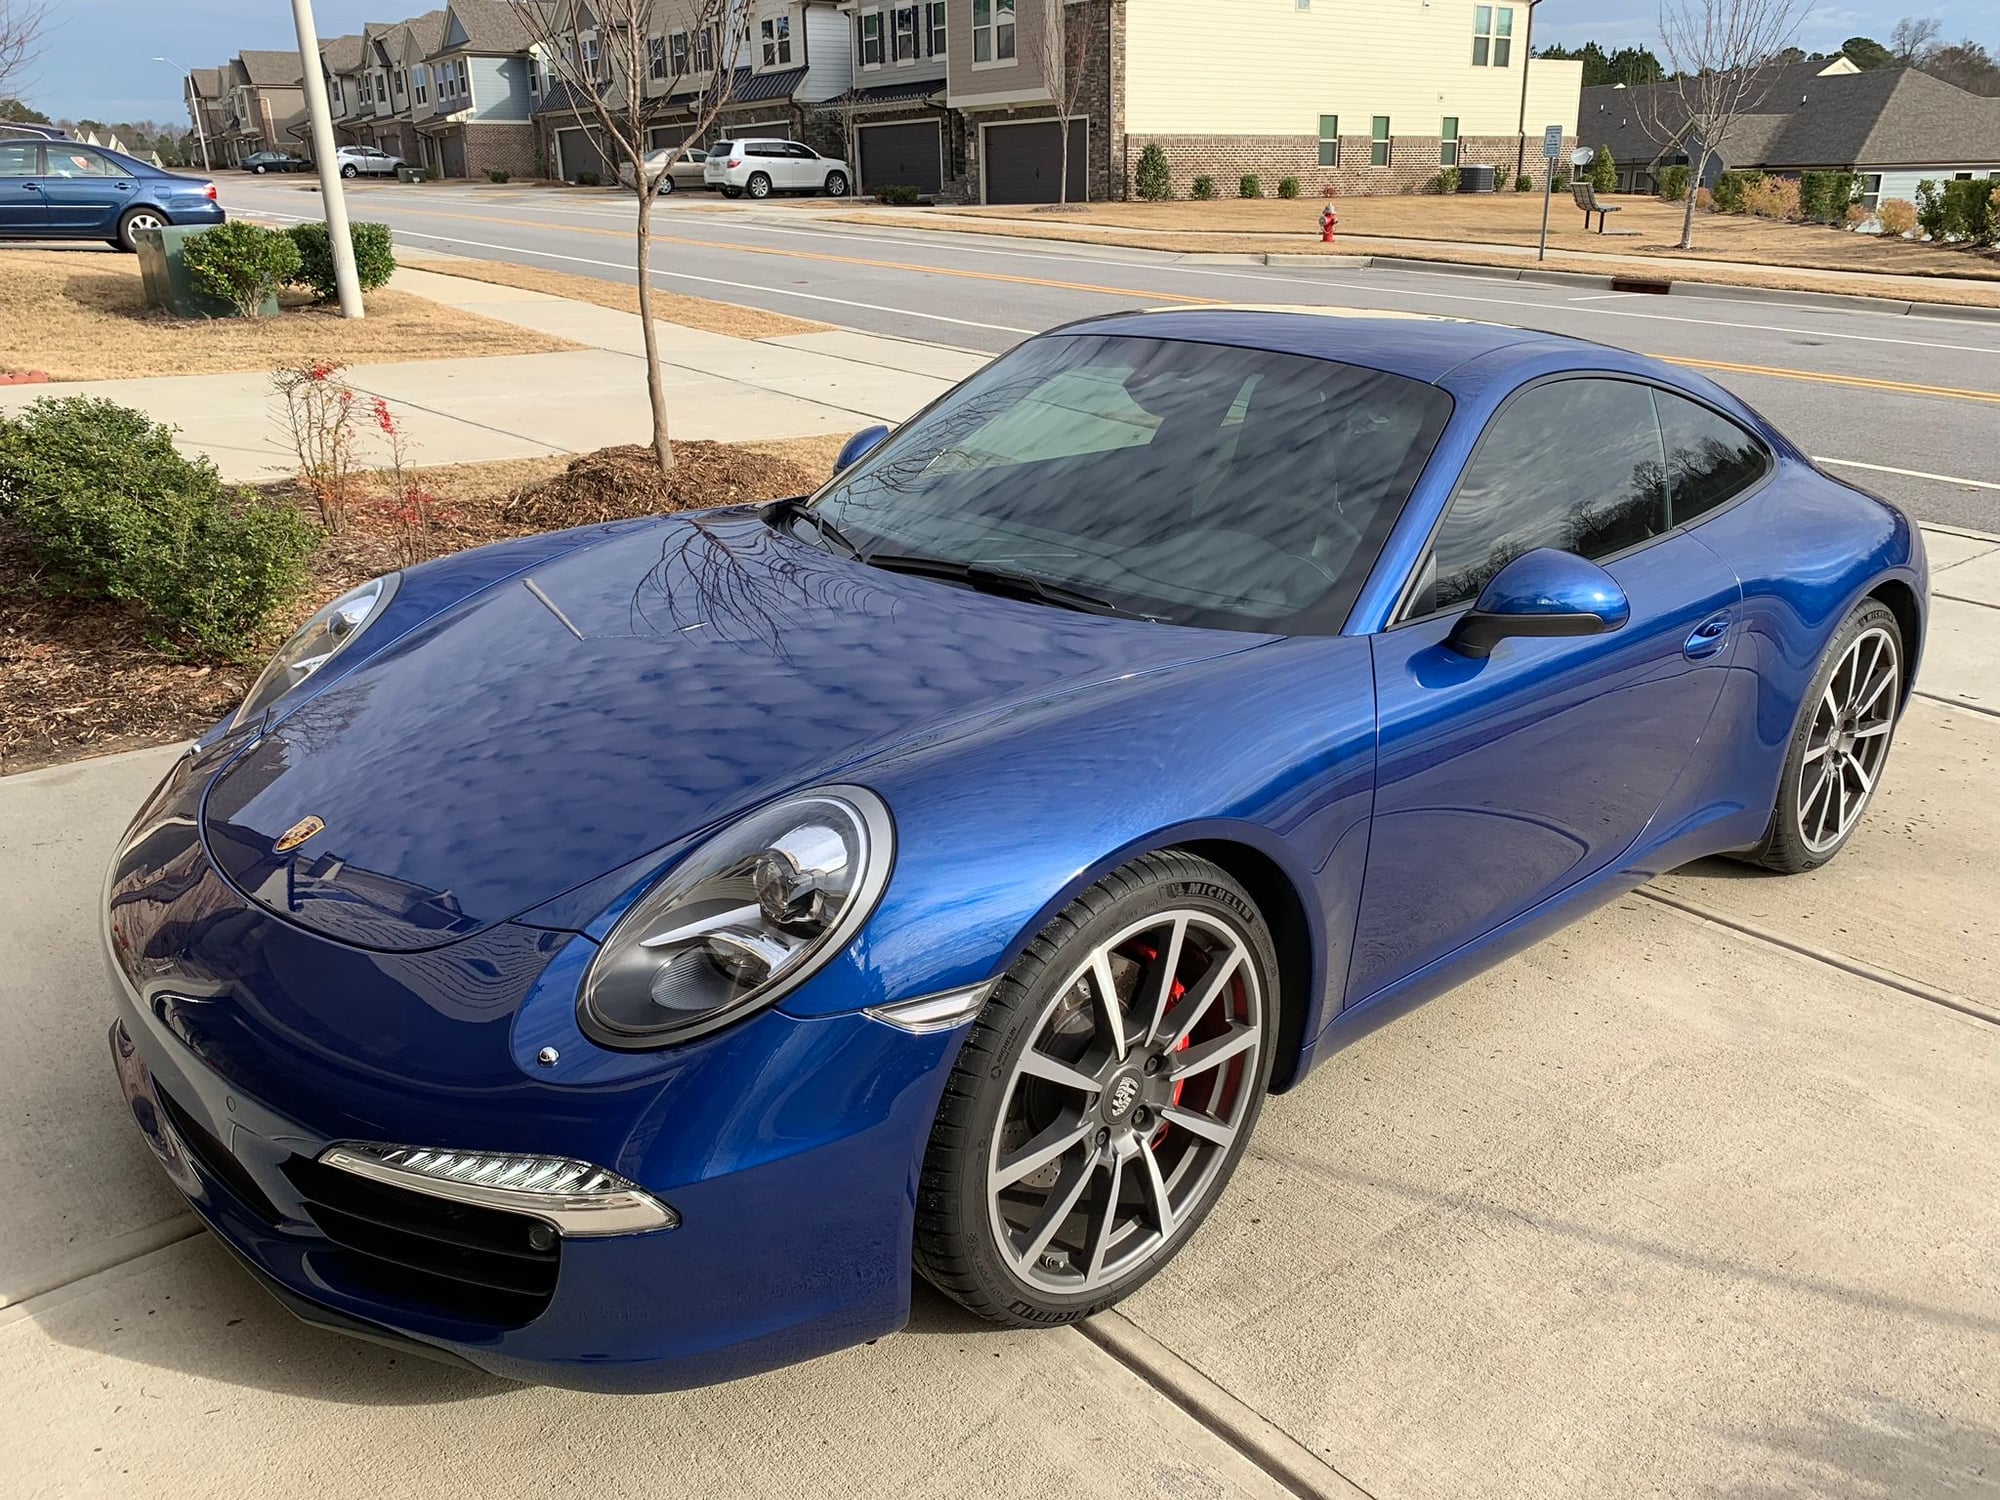 2012 Porsche 911 - 2012 Porsche 911 Carrera S (991.1) PDK - Used - VIN WP0AB2A92CS121659 - 31,000 Miles - 6 cyl - 2WD - Automatic - Coupe - Blue - Cary, NC 27519, United States